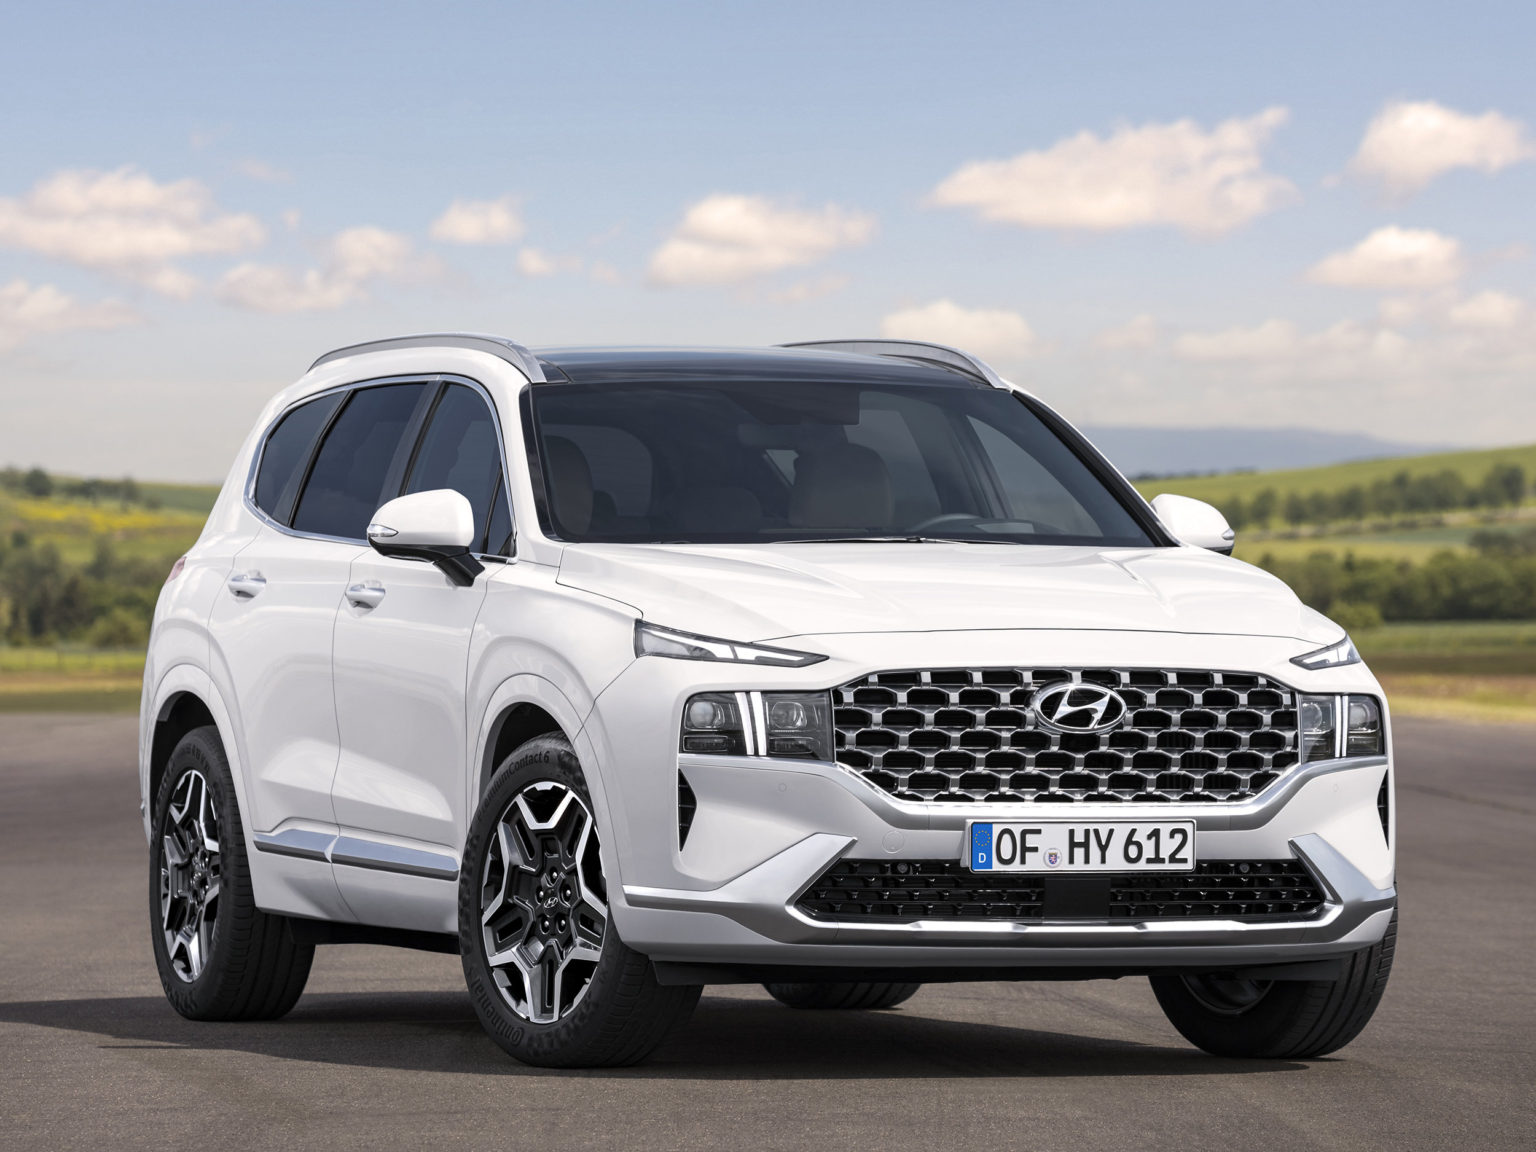 Hyundai has completely refreshed the Santa Fe for 2021.